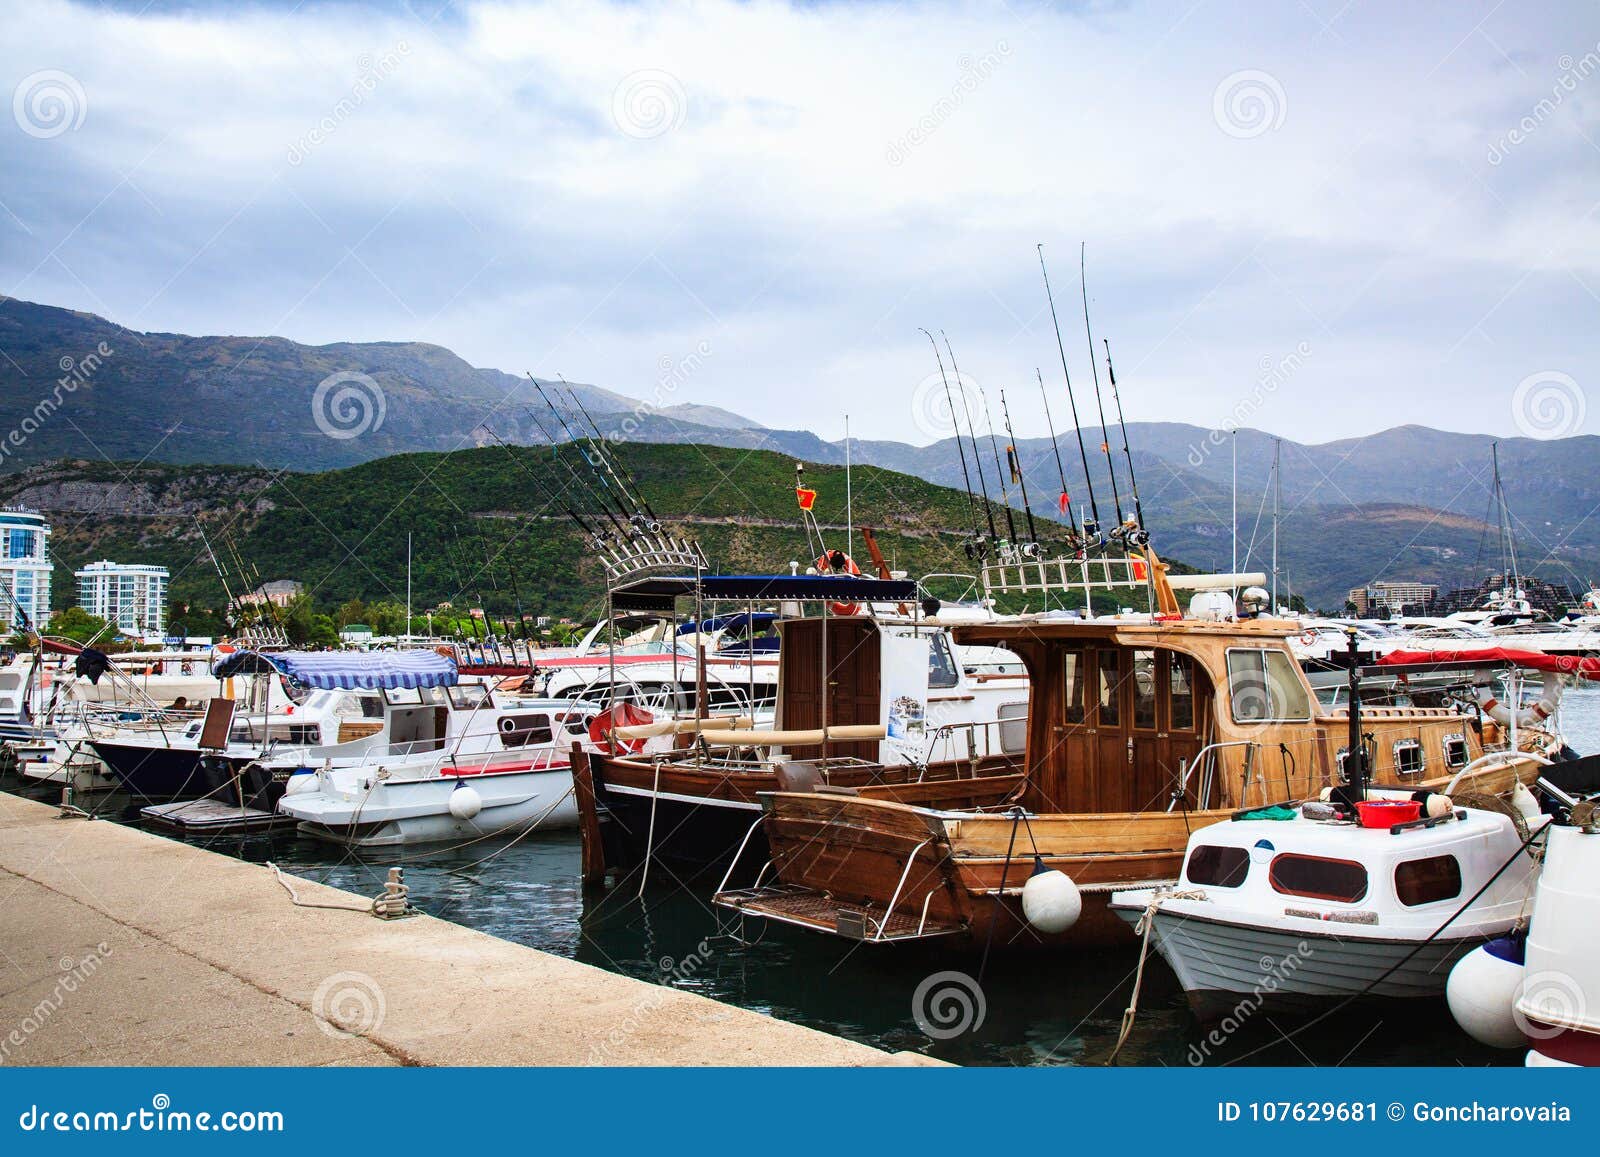 Motor Boats and Sailboats Docked in Harbor Against Mountains. Fishing ...